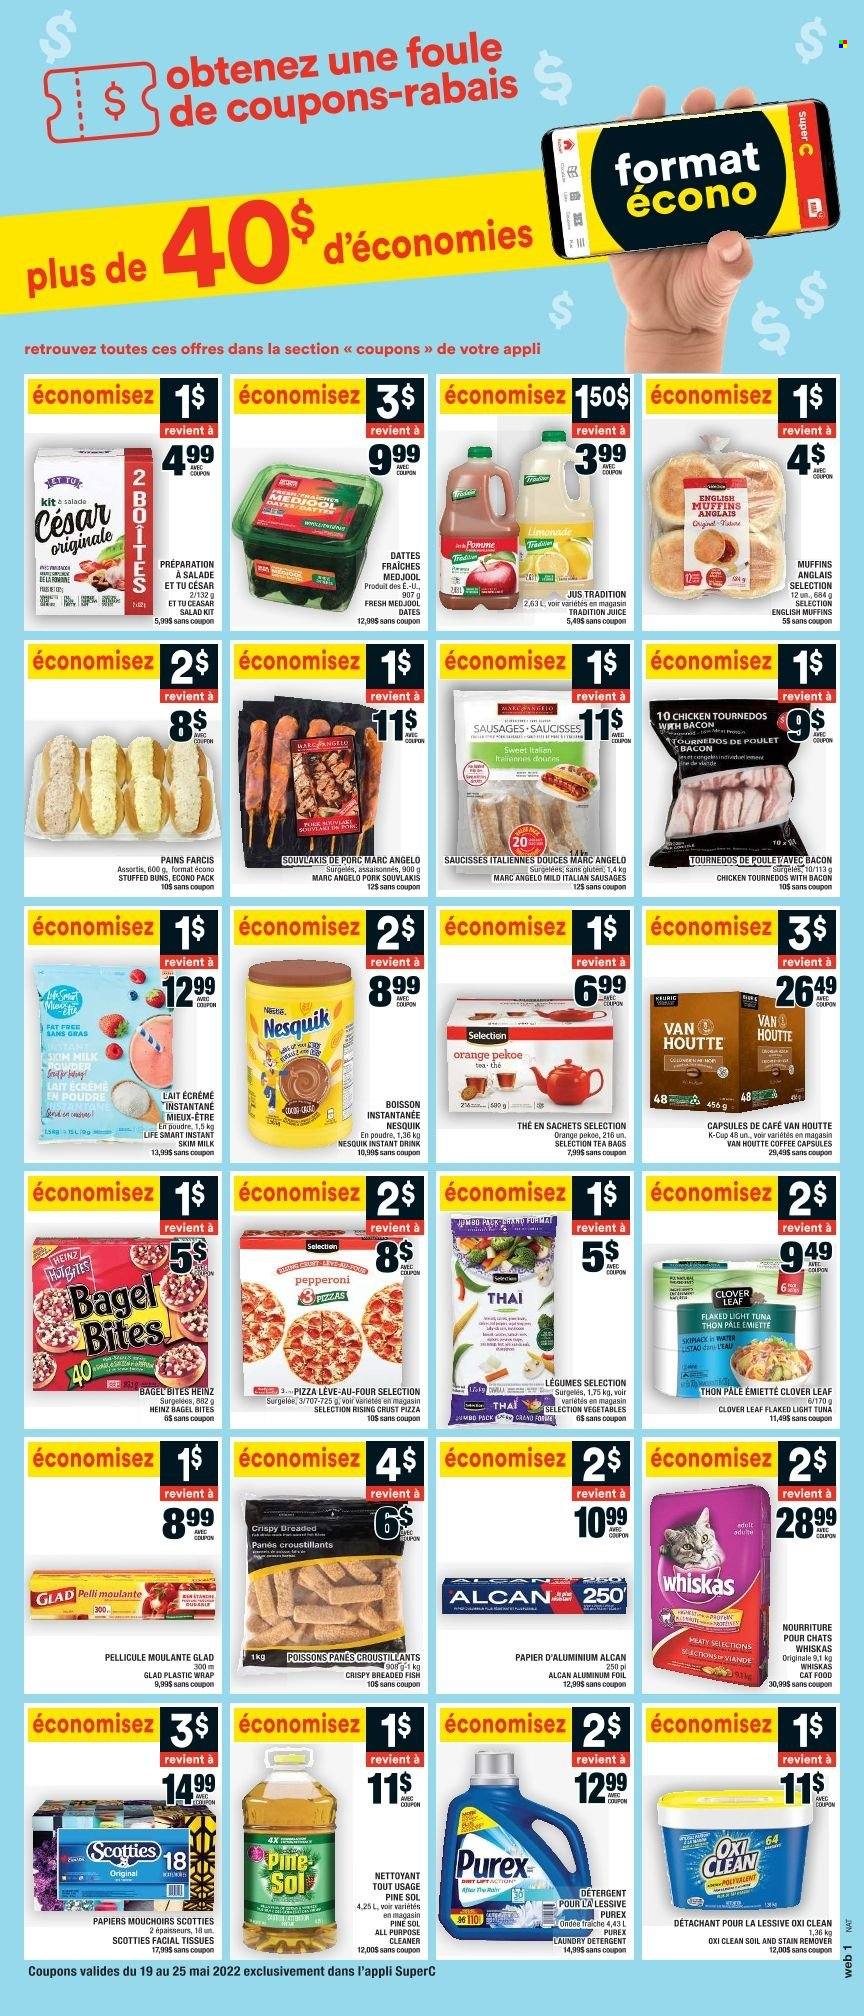 thumbnail - Super C Flyer - May 19, 2022 - May 25, 2022 - Sales products - bagels, buns, muffin, salad, fresh dates, fish, pizza, breaded fish, sausage, pepperoni, bacon sausage, Clover, milk, light tuna, juice, tea bags, coffee, coffee capsules, K-Cups, tissues, cleaner, all purpose cleaner, stain remover, Pine-Sol, Purex, facial tissues, detergent, Heinz, Whiskas, oranges, Nesquik. Page 11.